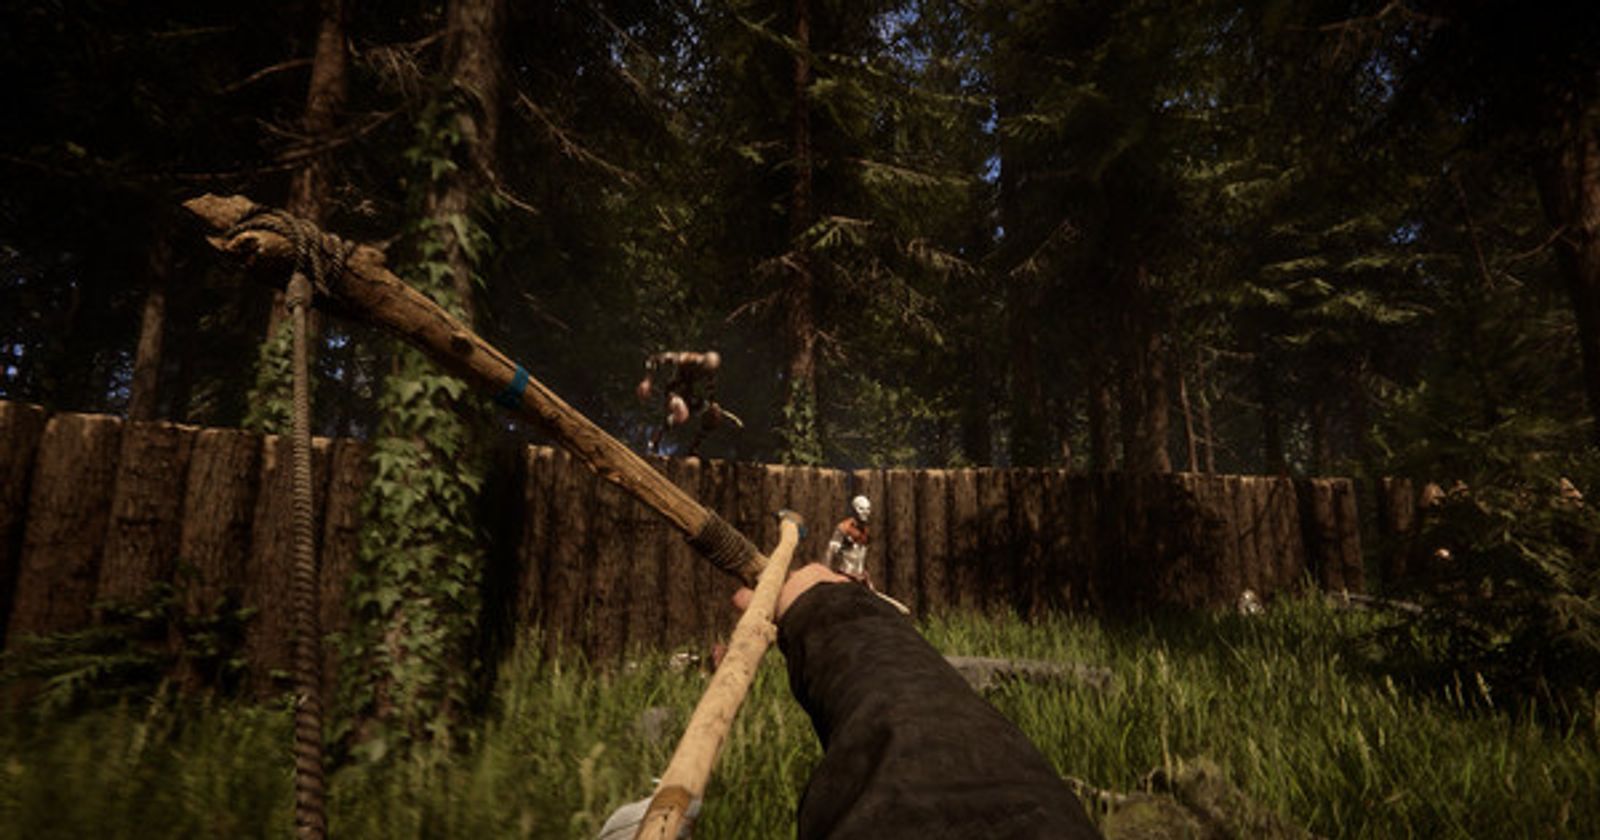 All enemies in Sons of the Forest: Cannibals, mutants & more - Dexerto